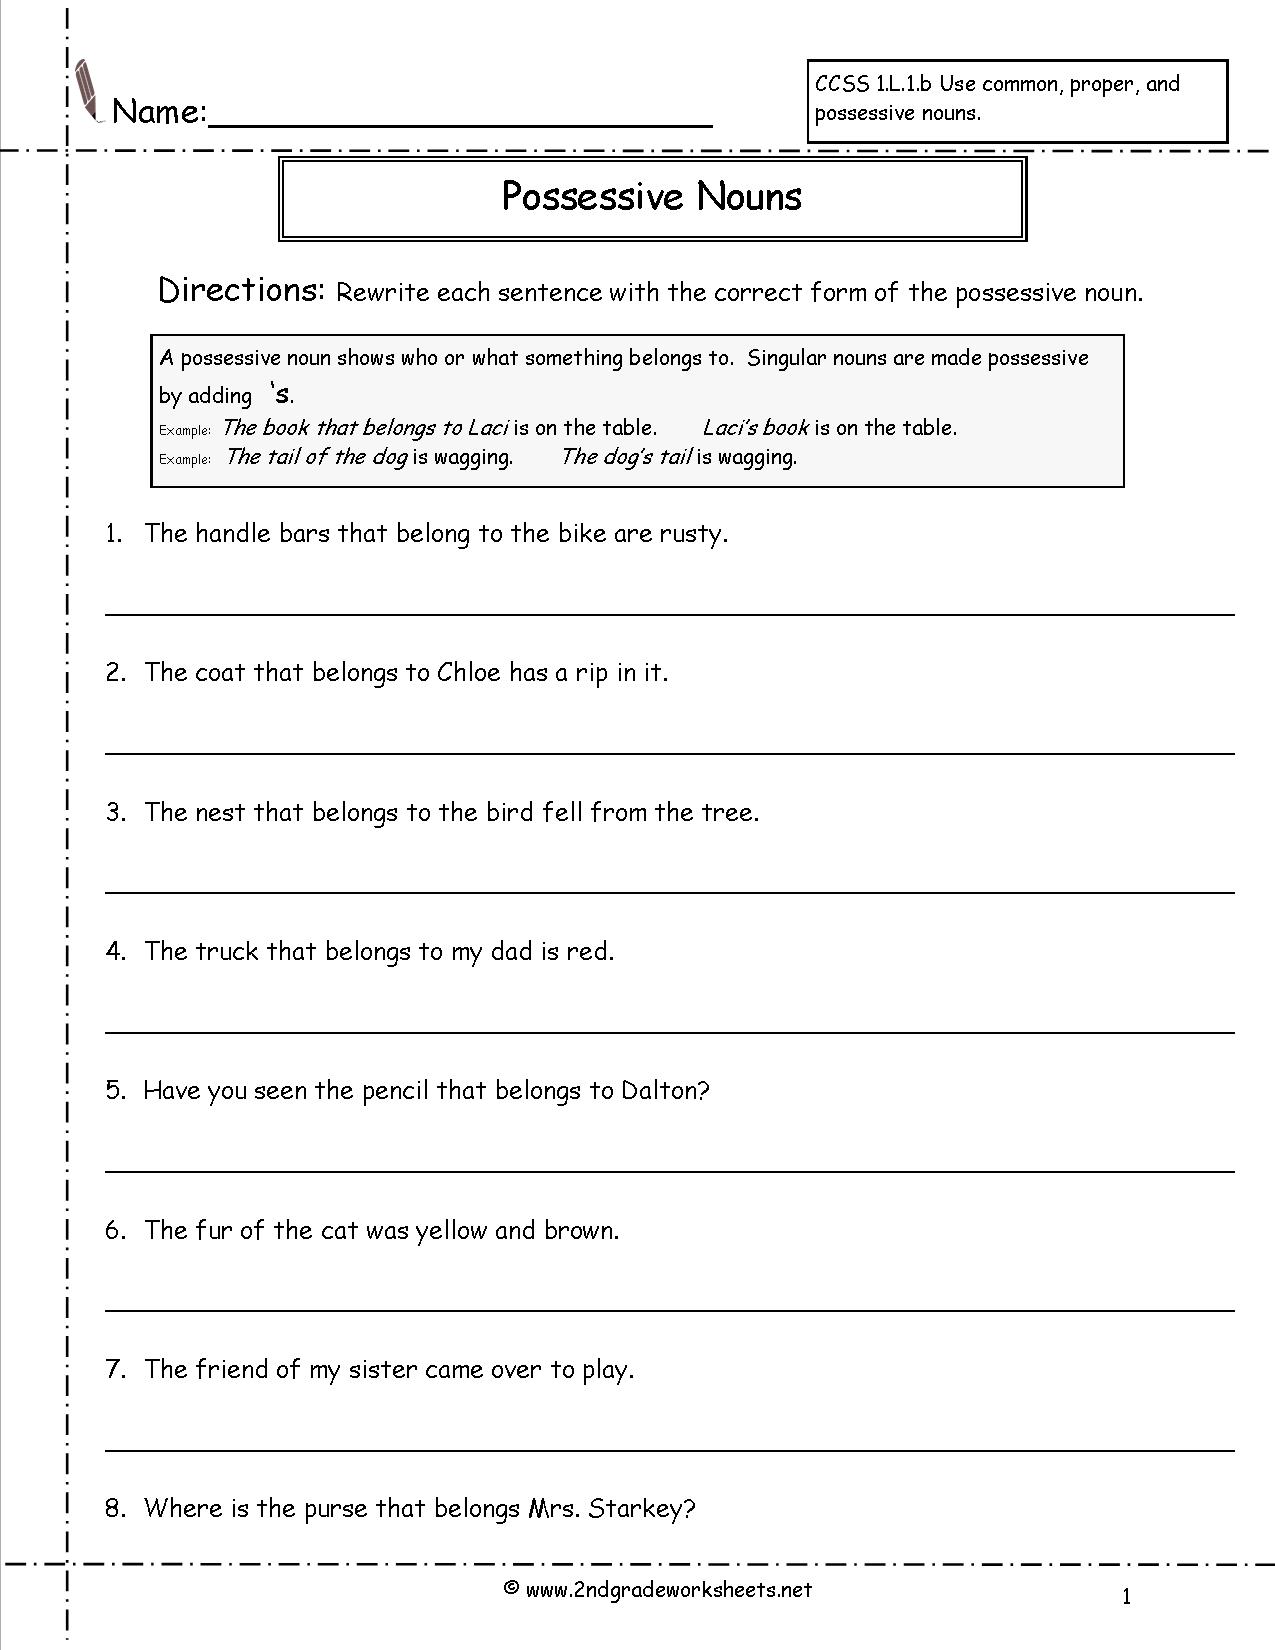 16 Best Images Of Free Common Noun Printable Worksheets Free Noun Worksheets Noun Worksheet